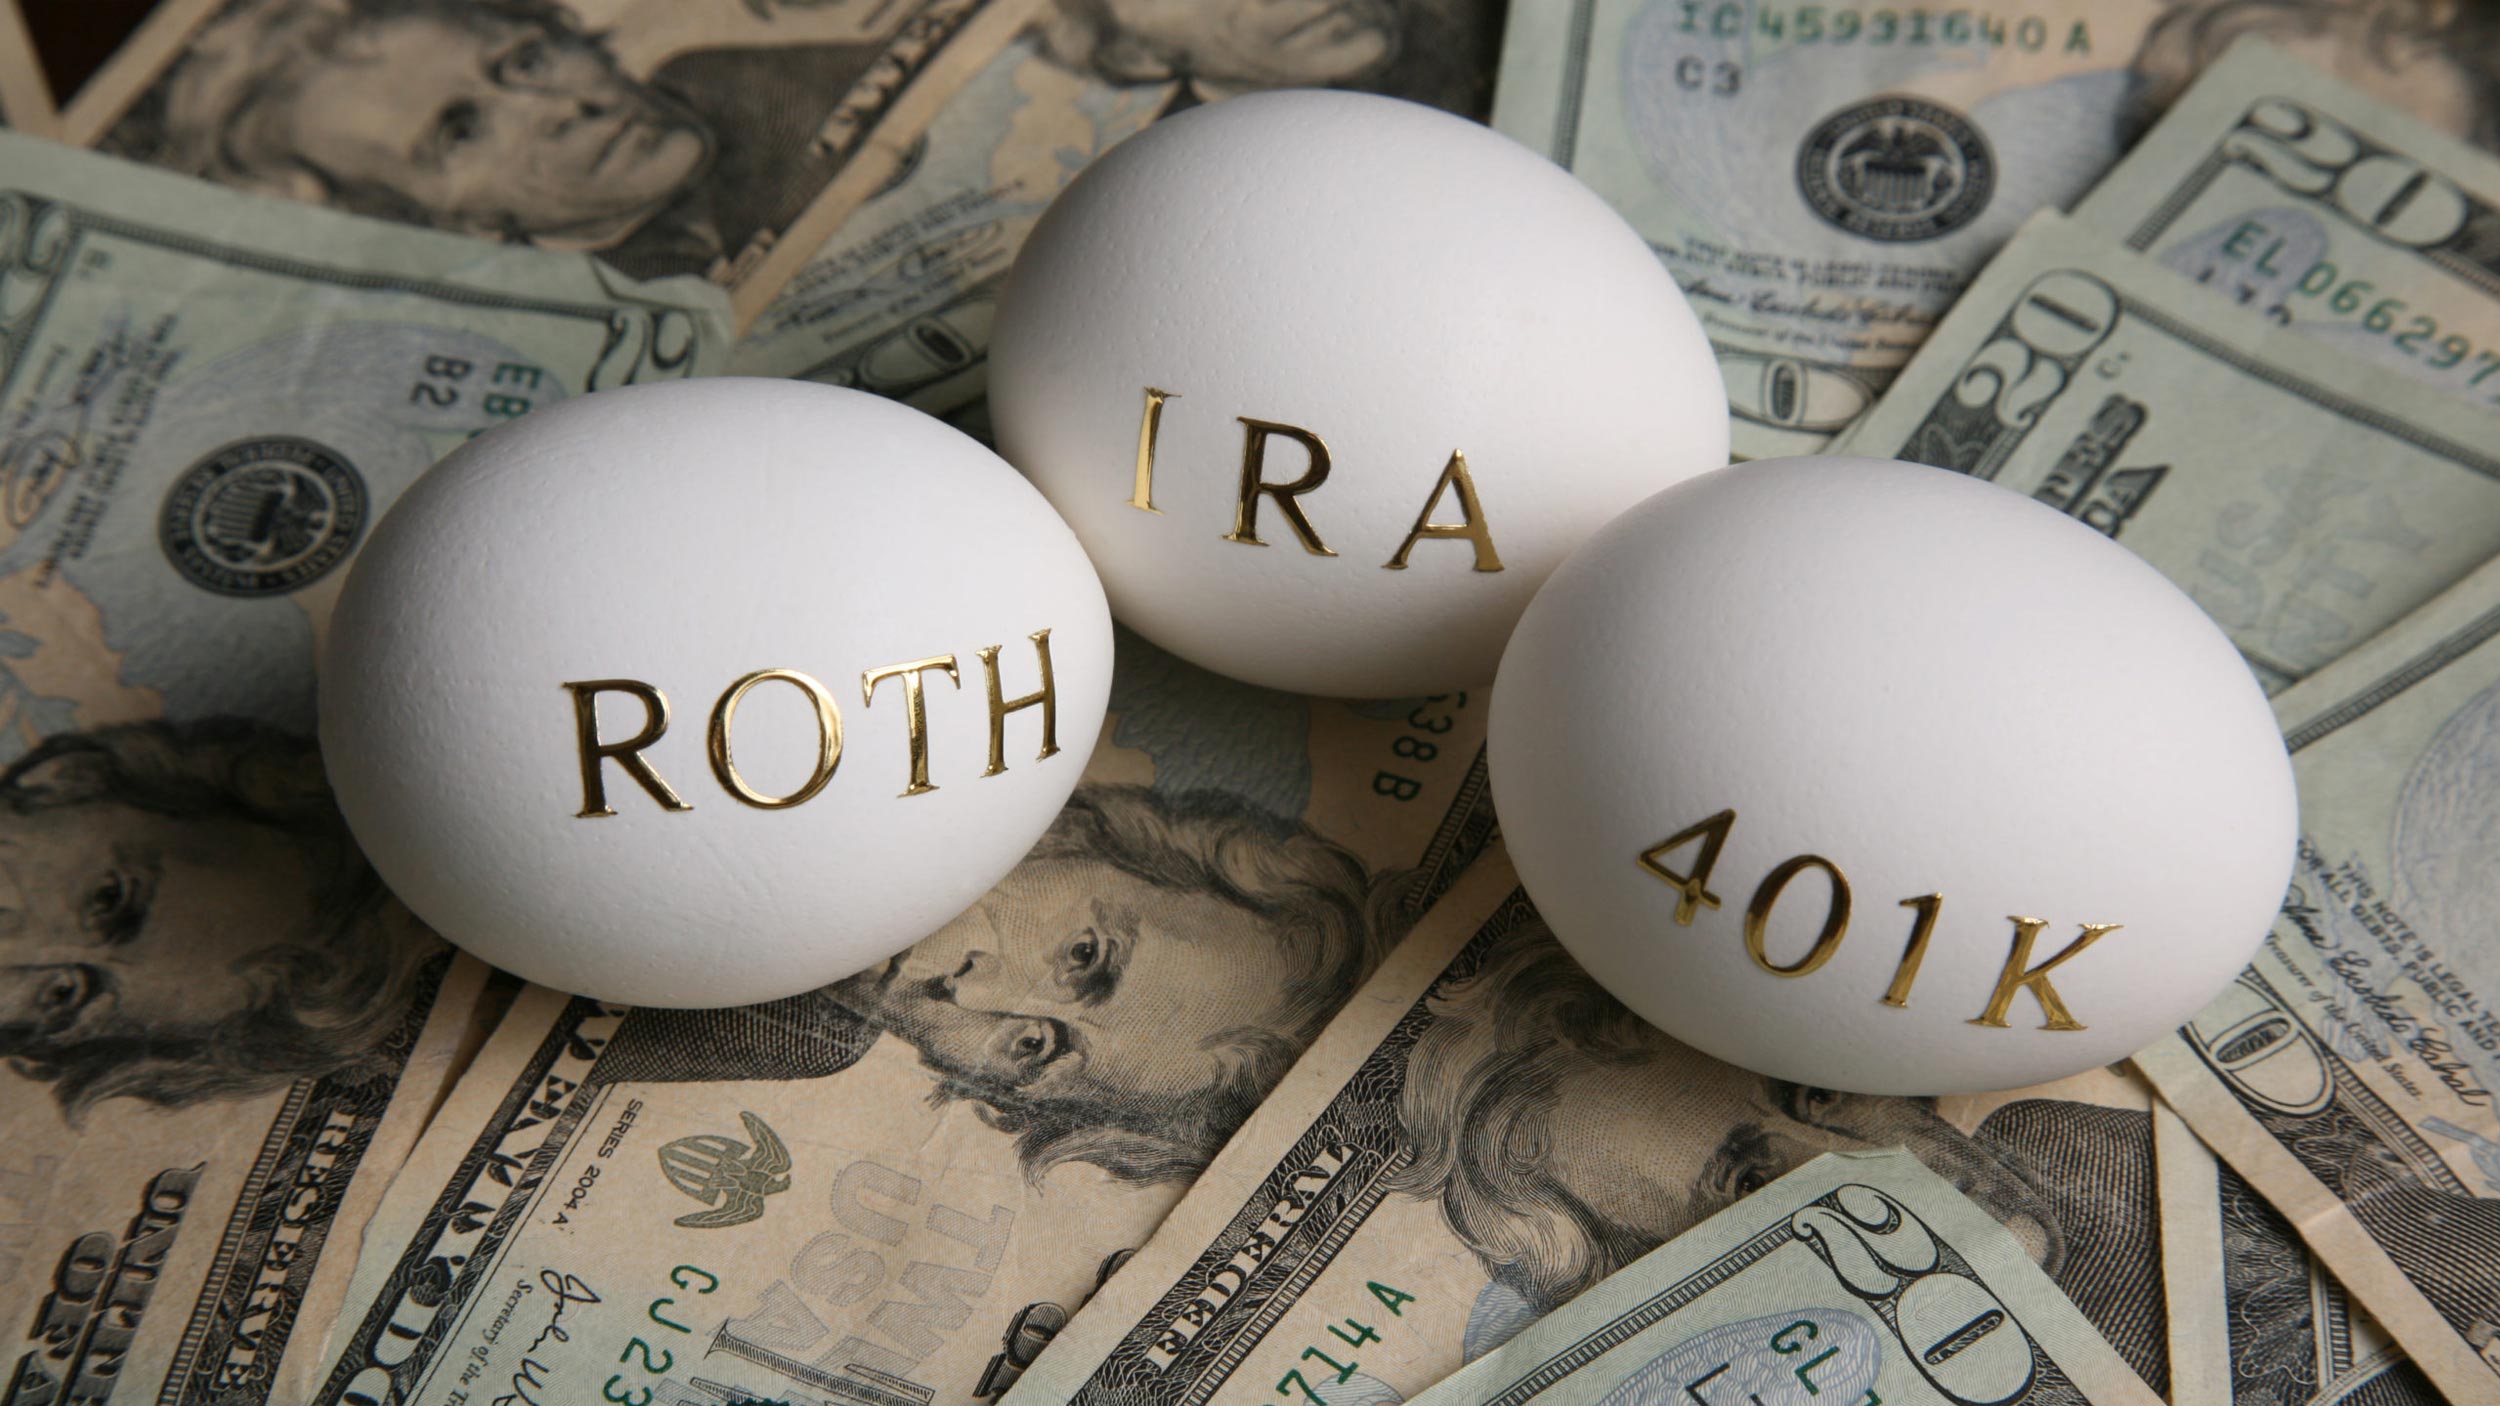 The Roth Solo 401k: Everything You Need to Know